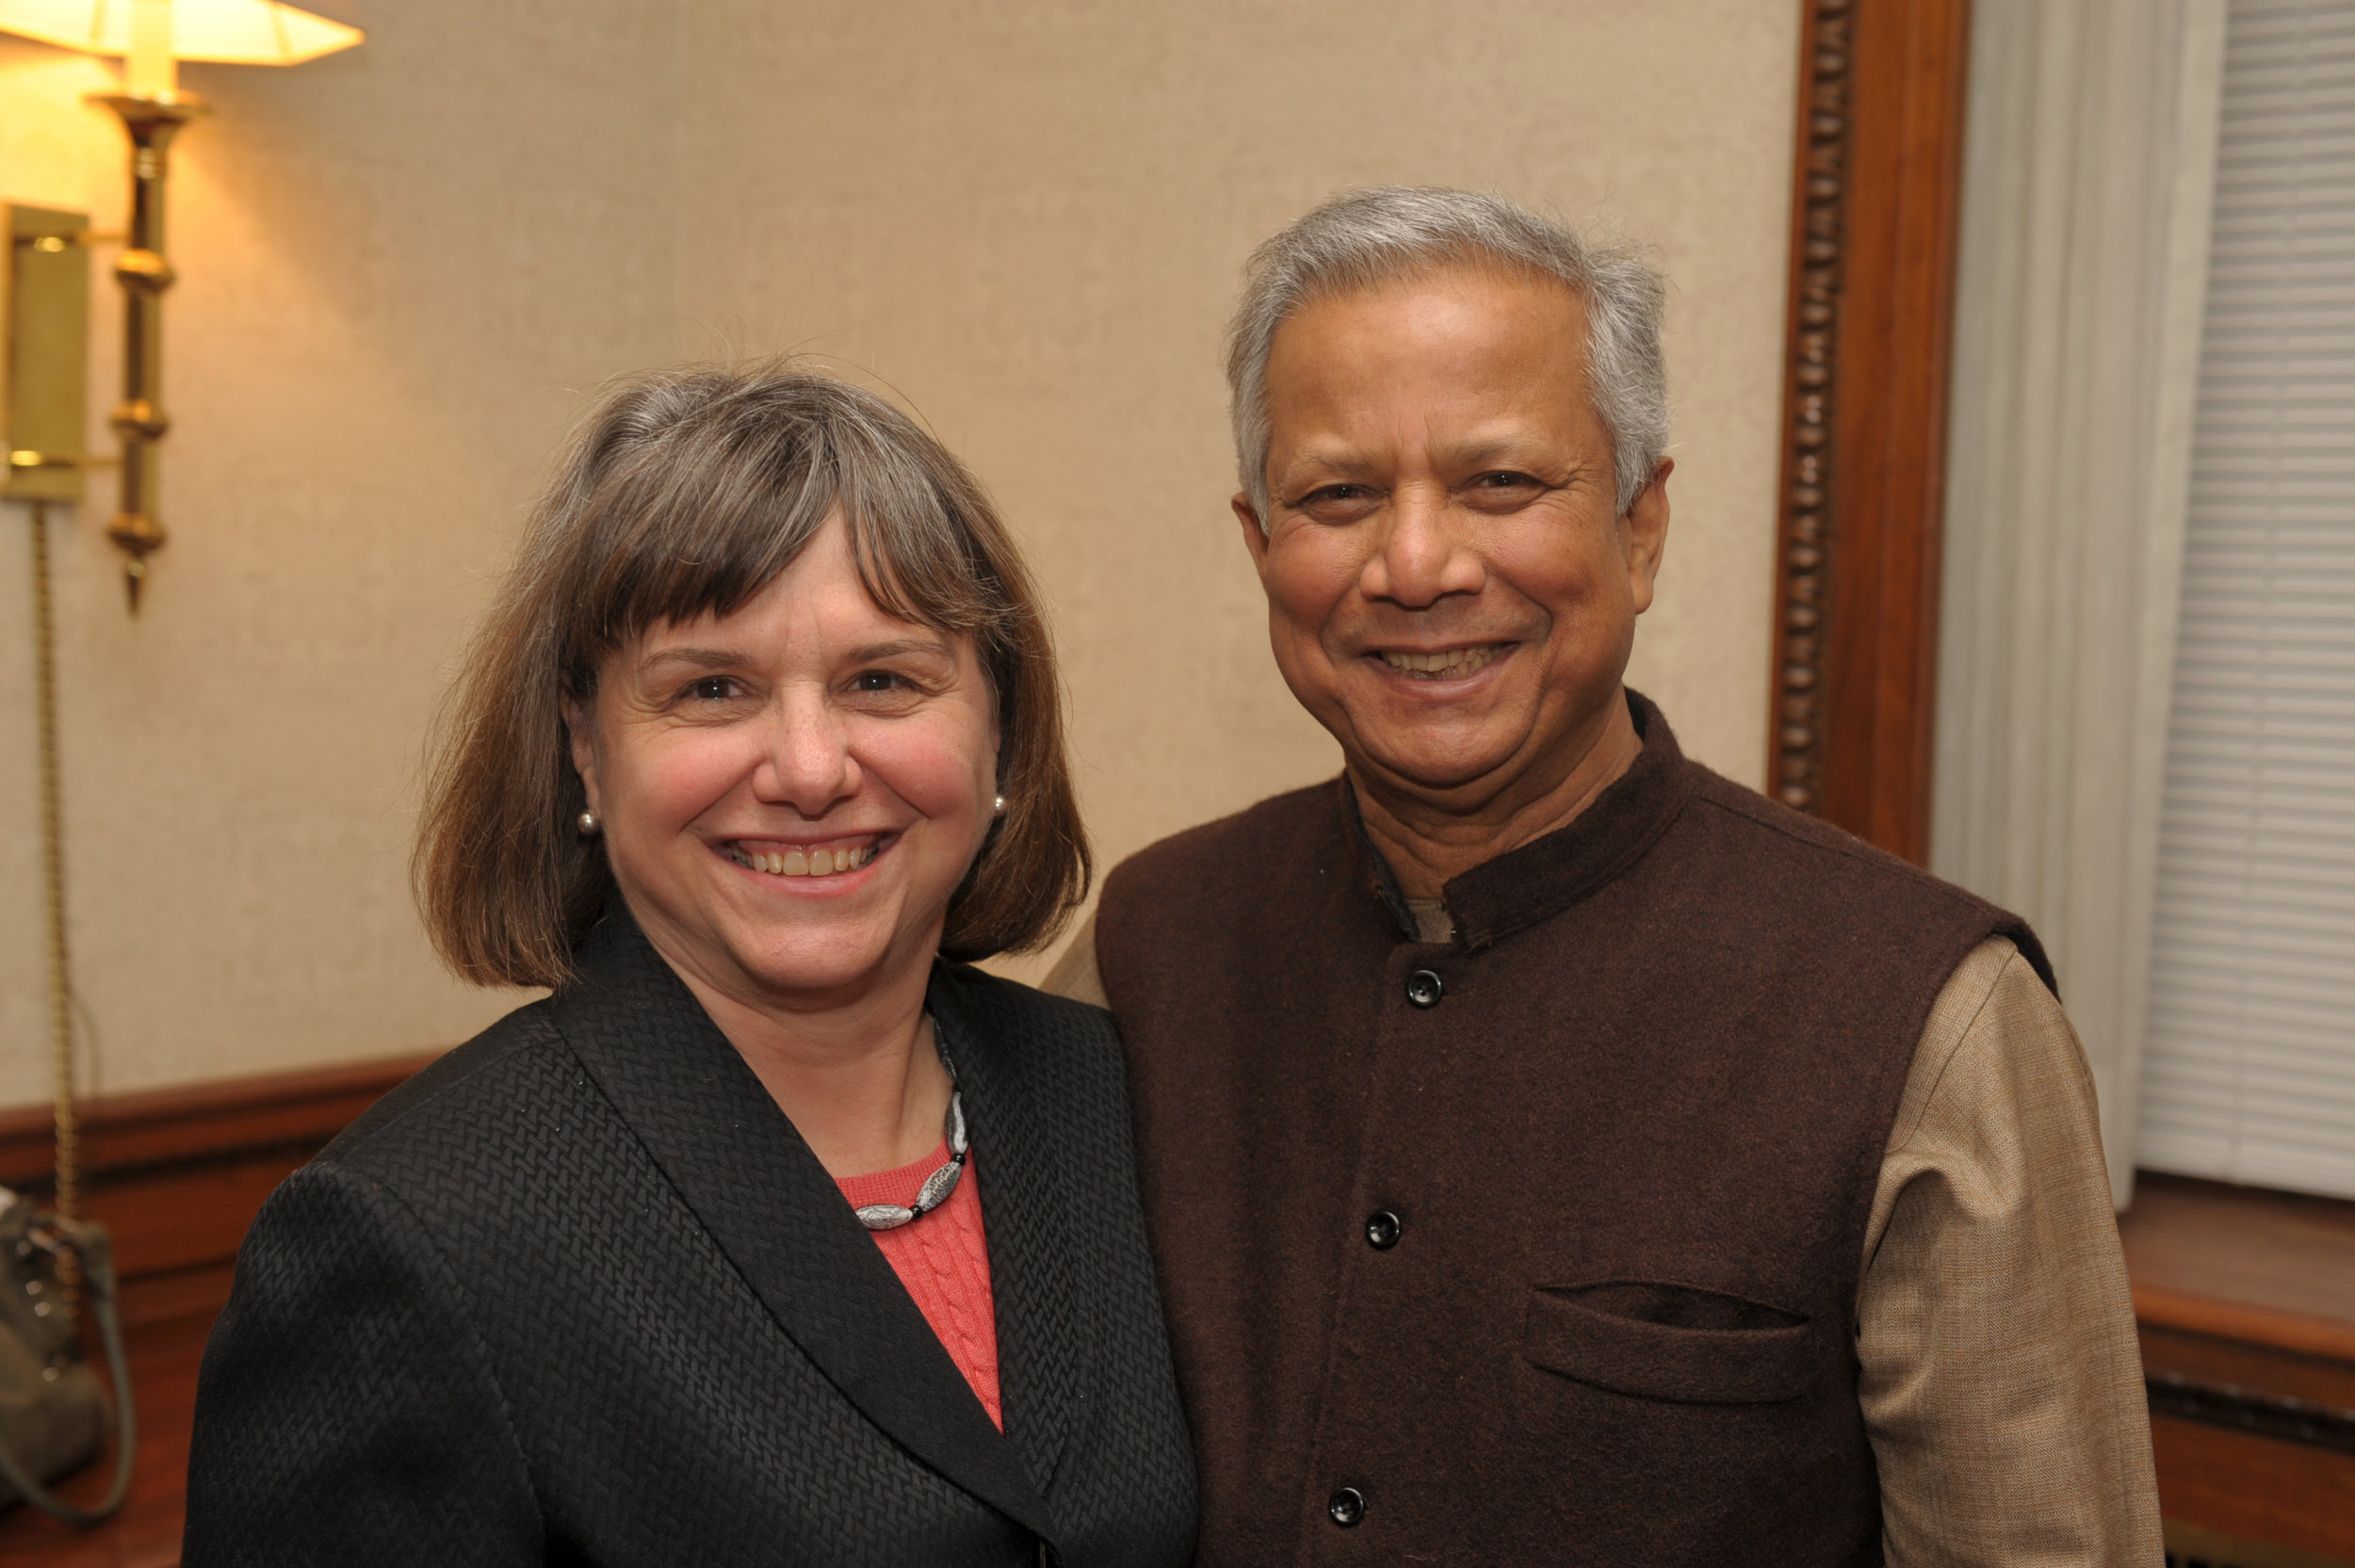  Introducing Dr. Mohammad Yunis of Grameen Bank at the Syracuse University Speaker Series (2010) 